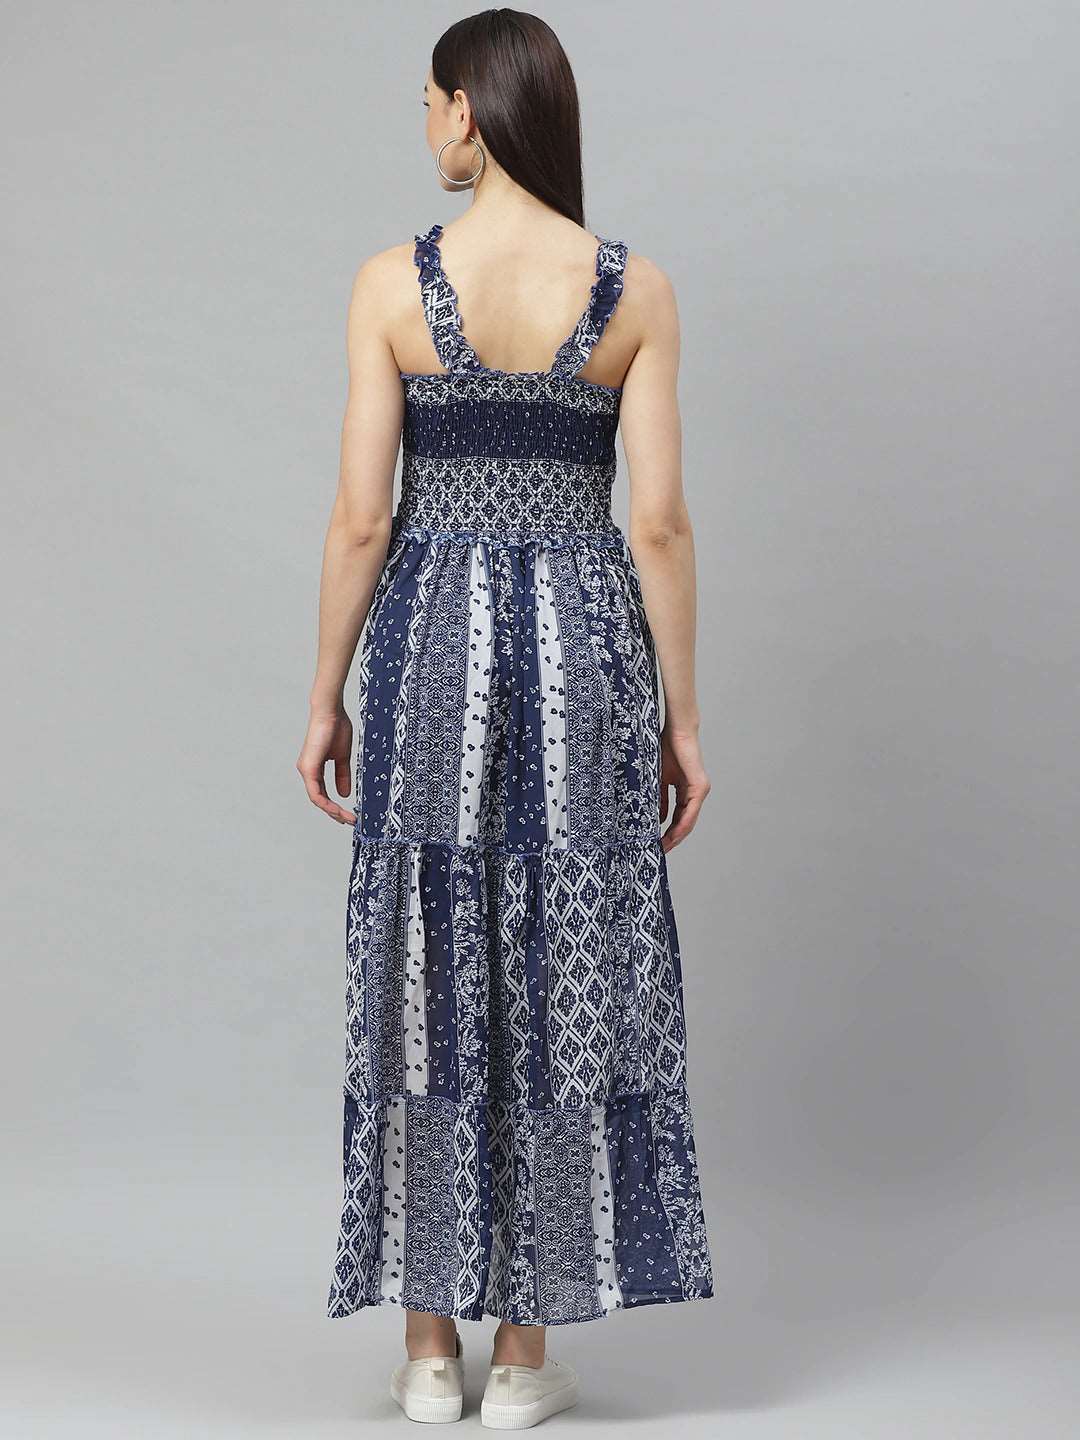 Navy Blue and White Geometric Printed Maxi Tiered Dress